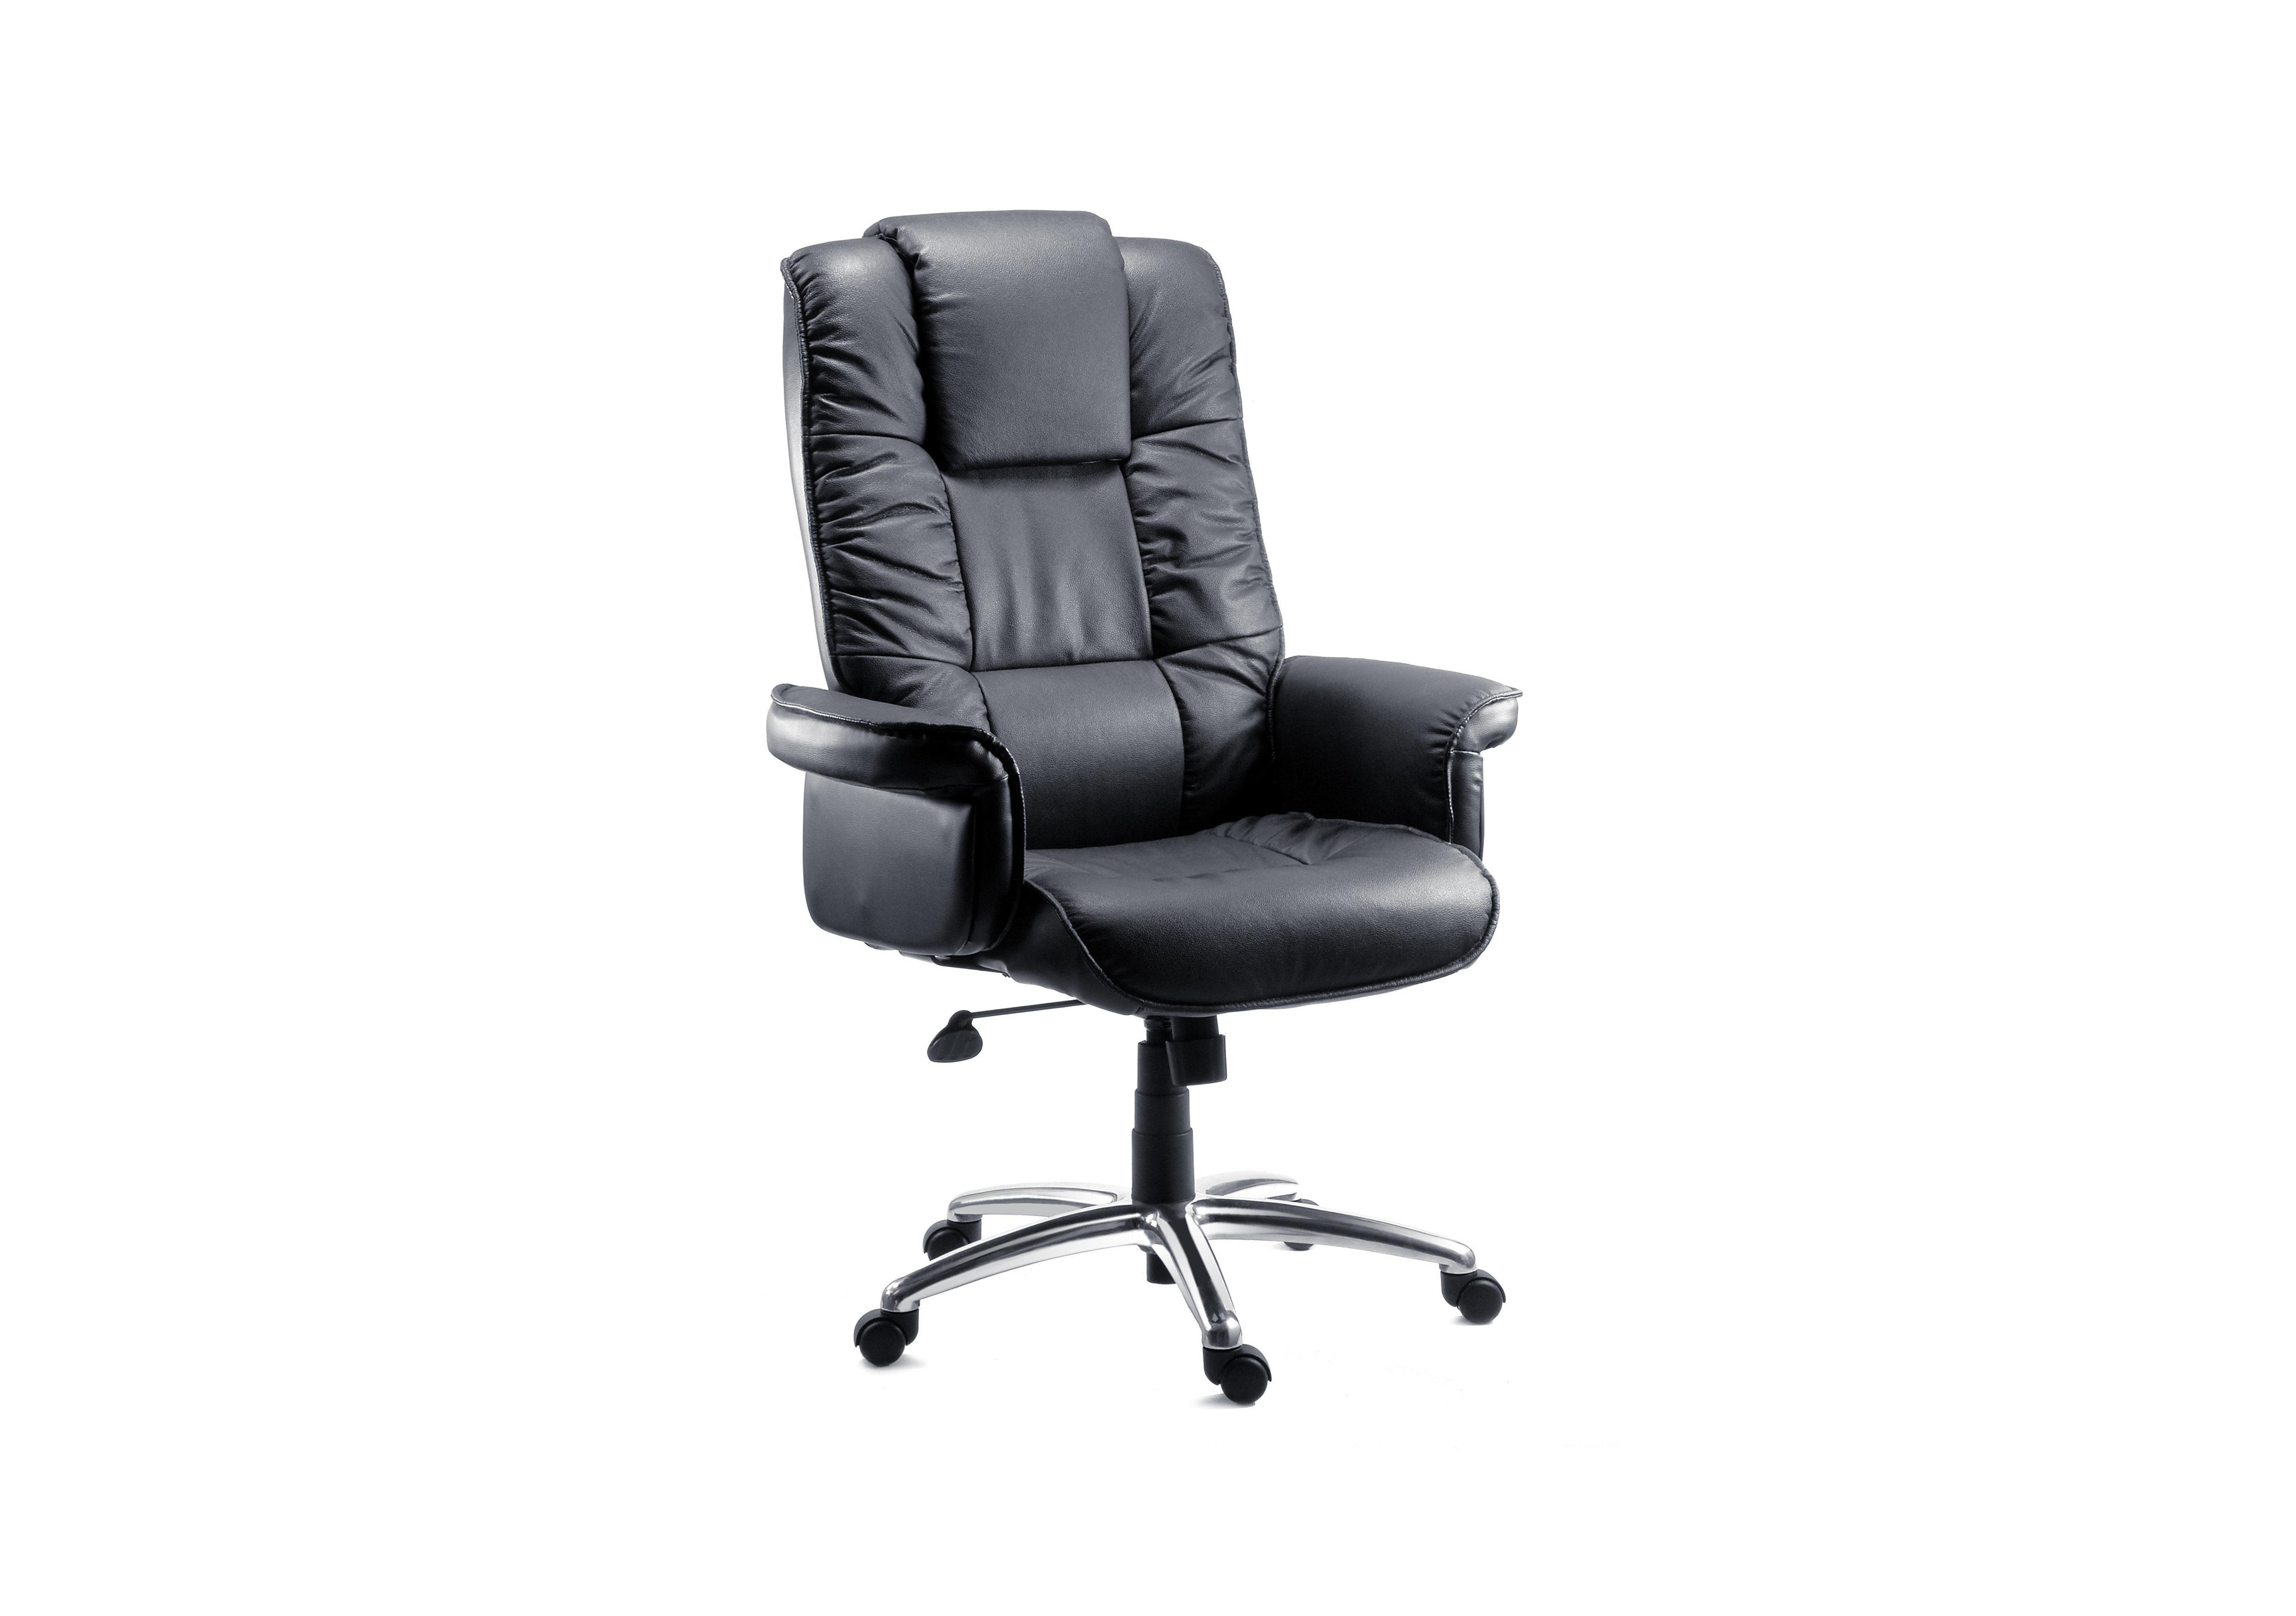 East River Pier 17 Office Chair in Black on Furniture Village